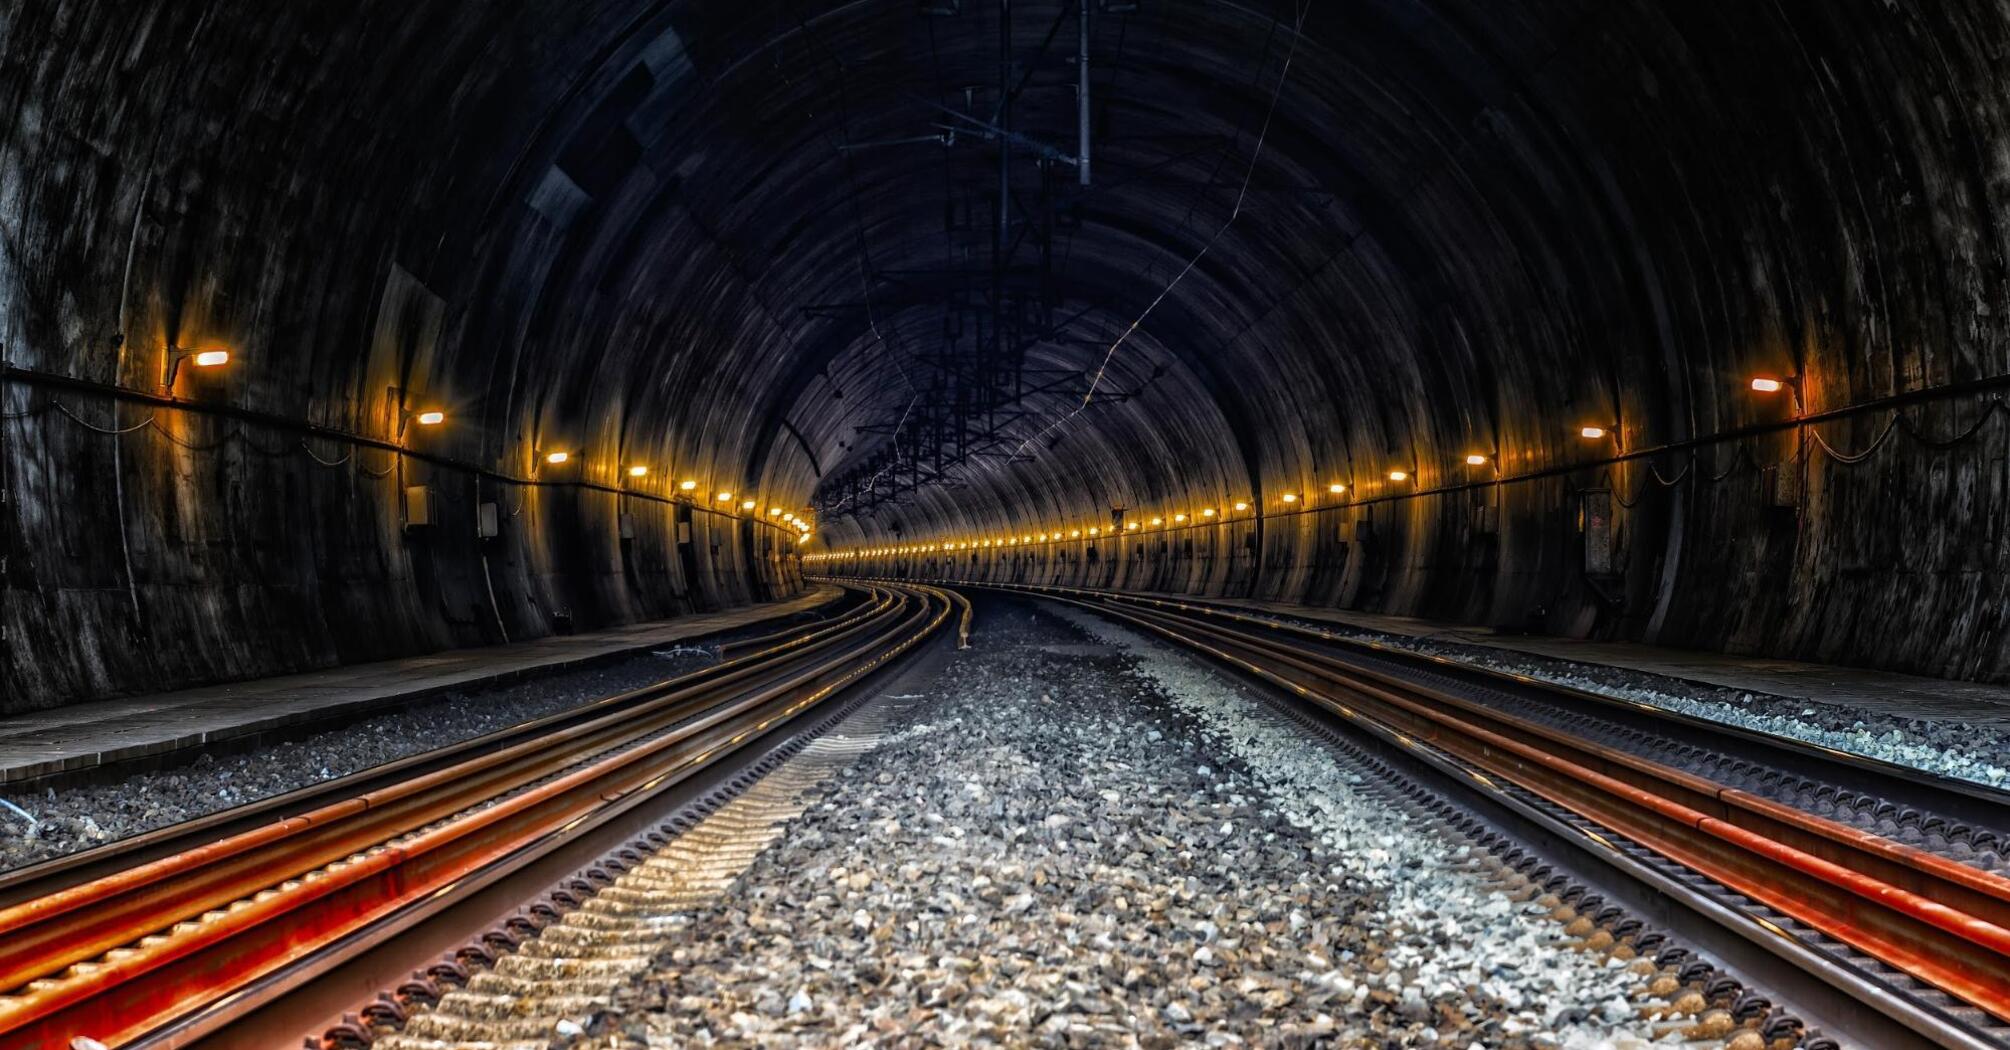 Railway tunnel with underground tracks and engineering communications